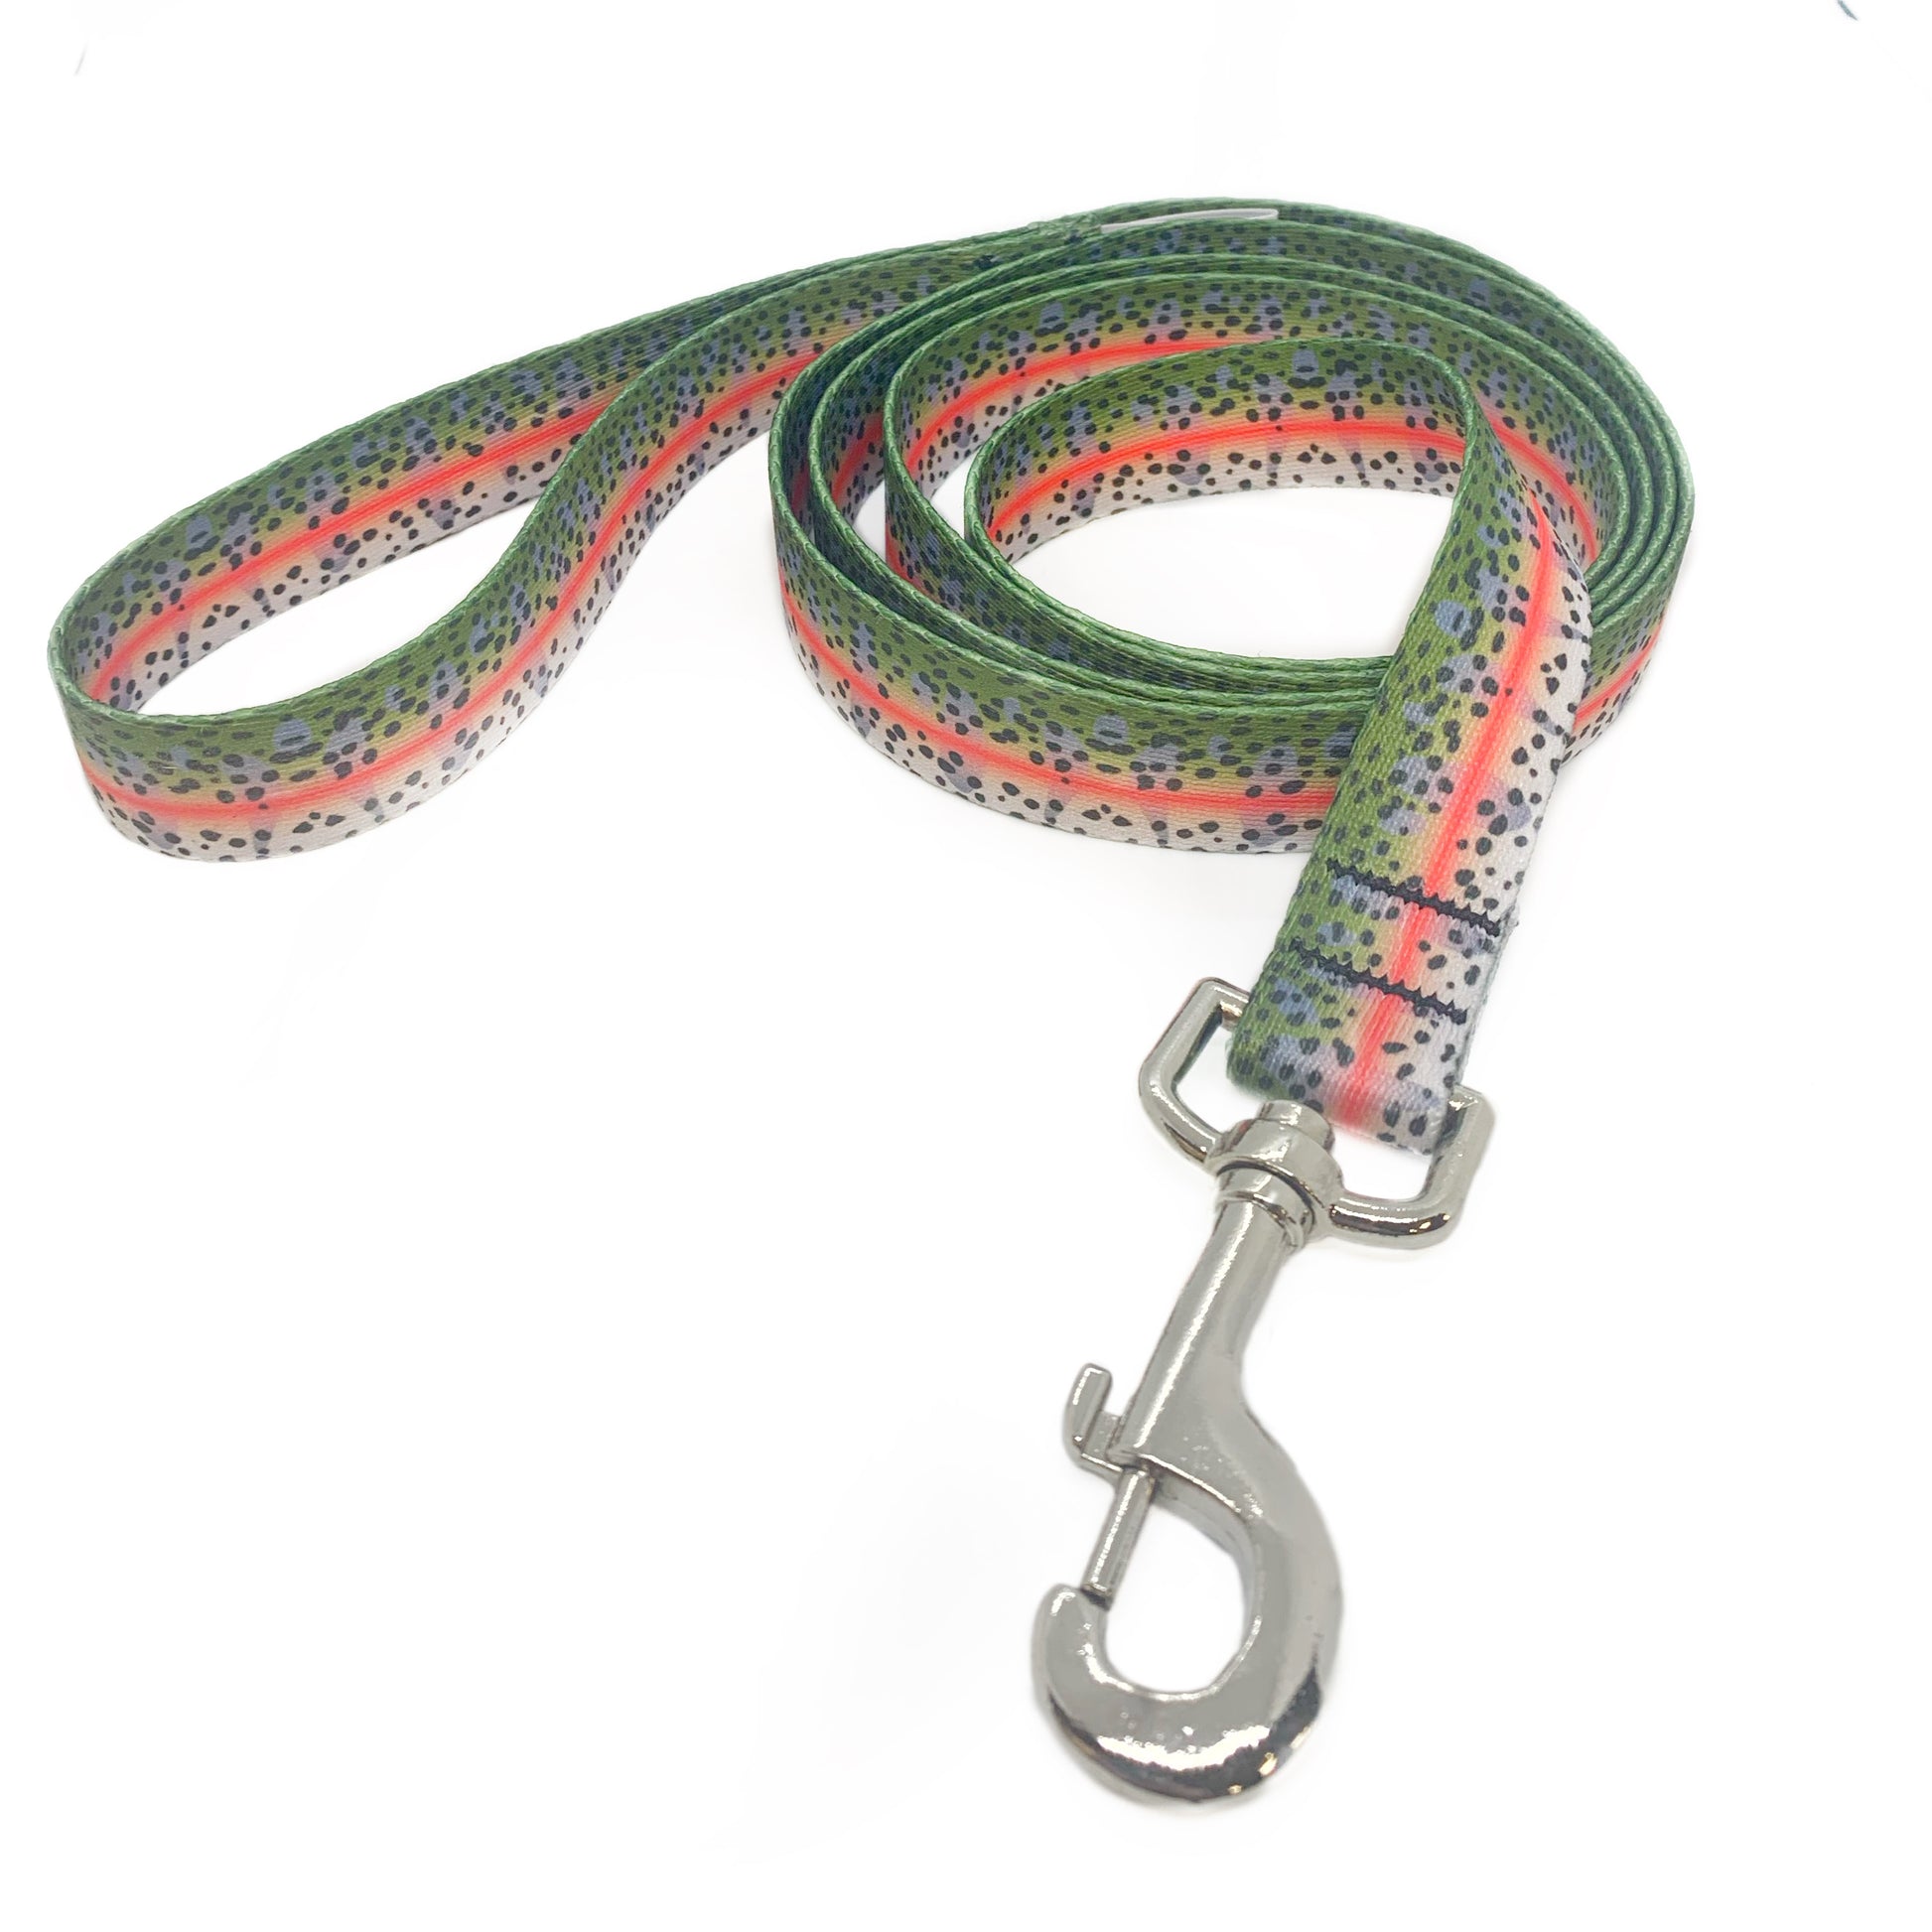 A dog leash with black metal clip in rainbow trout print